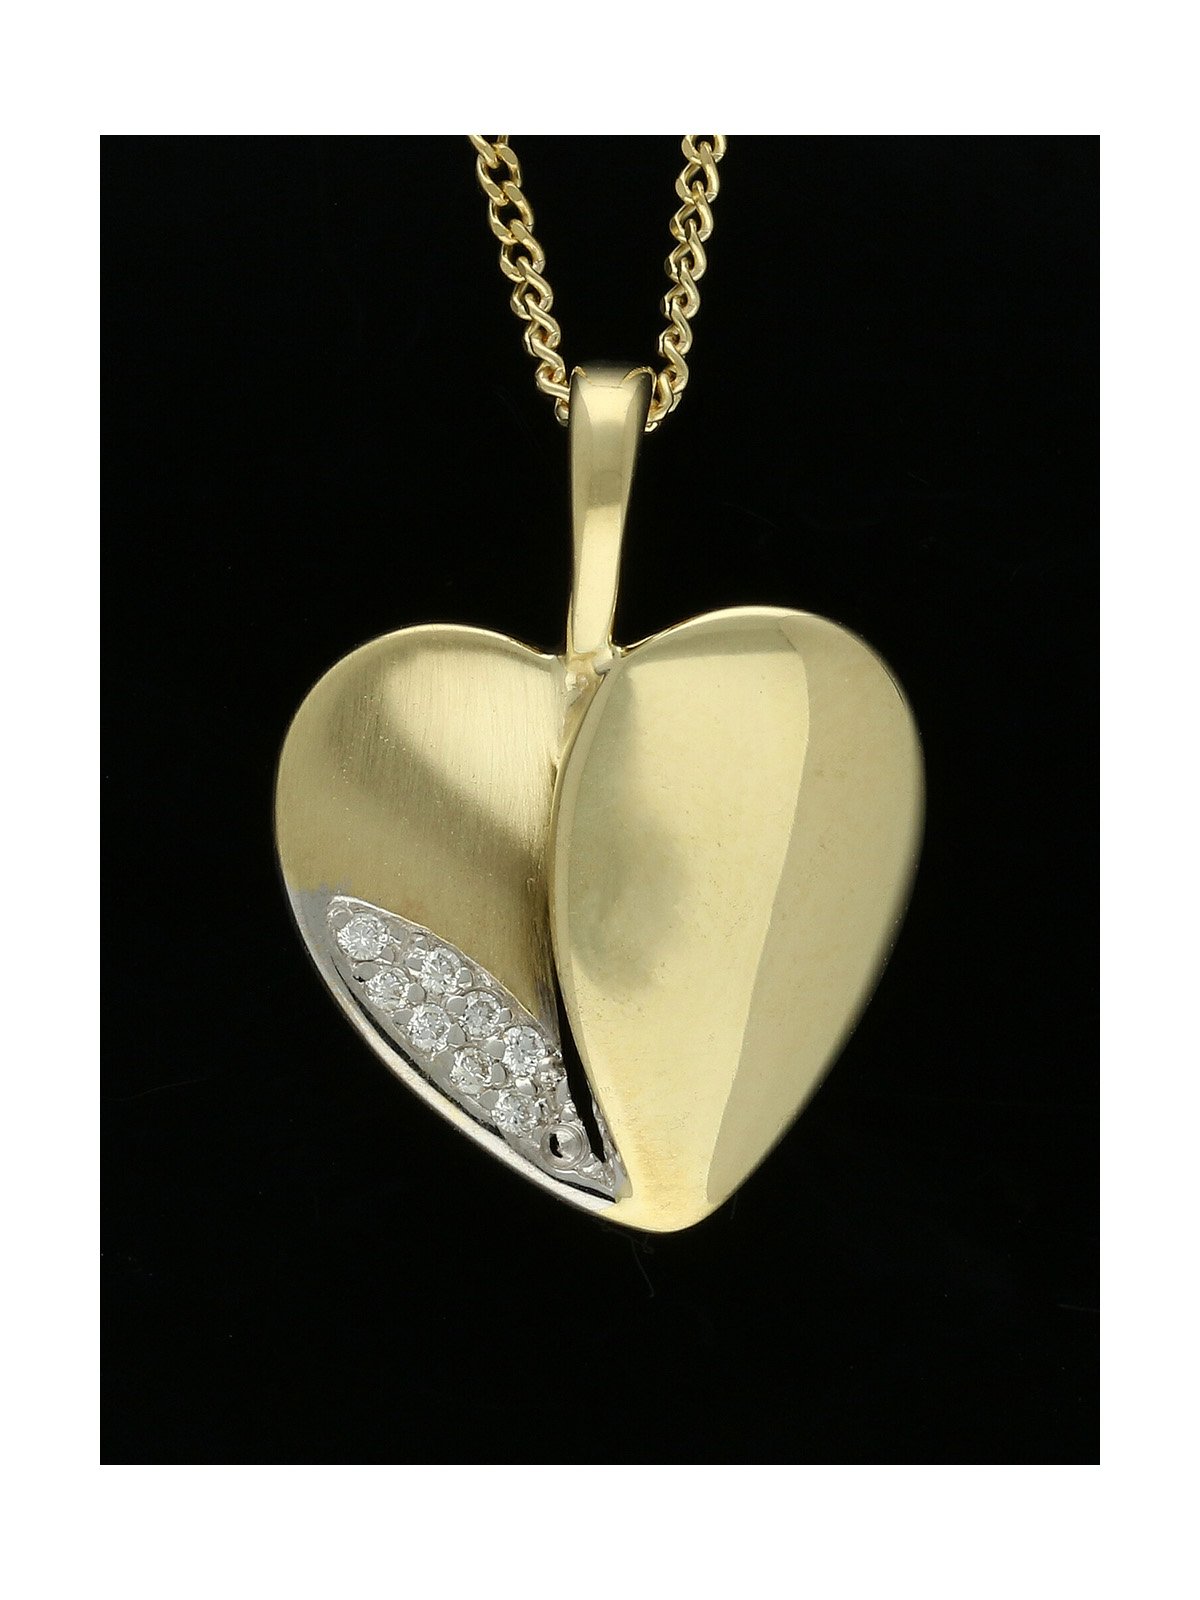 Diamond Heart Pendant Necklace in 9ct Yellow Gold